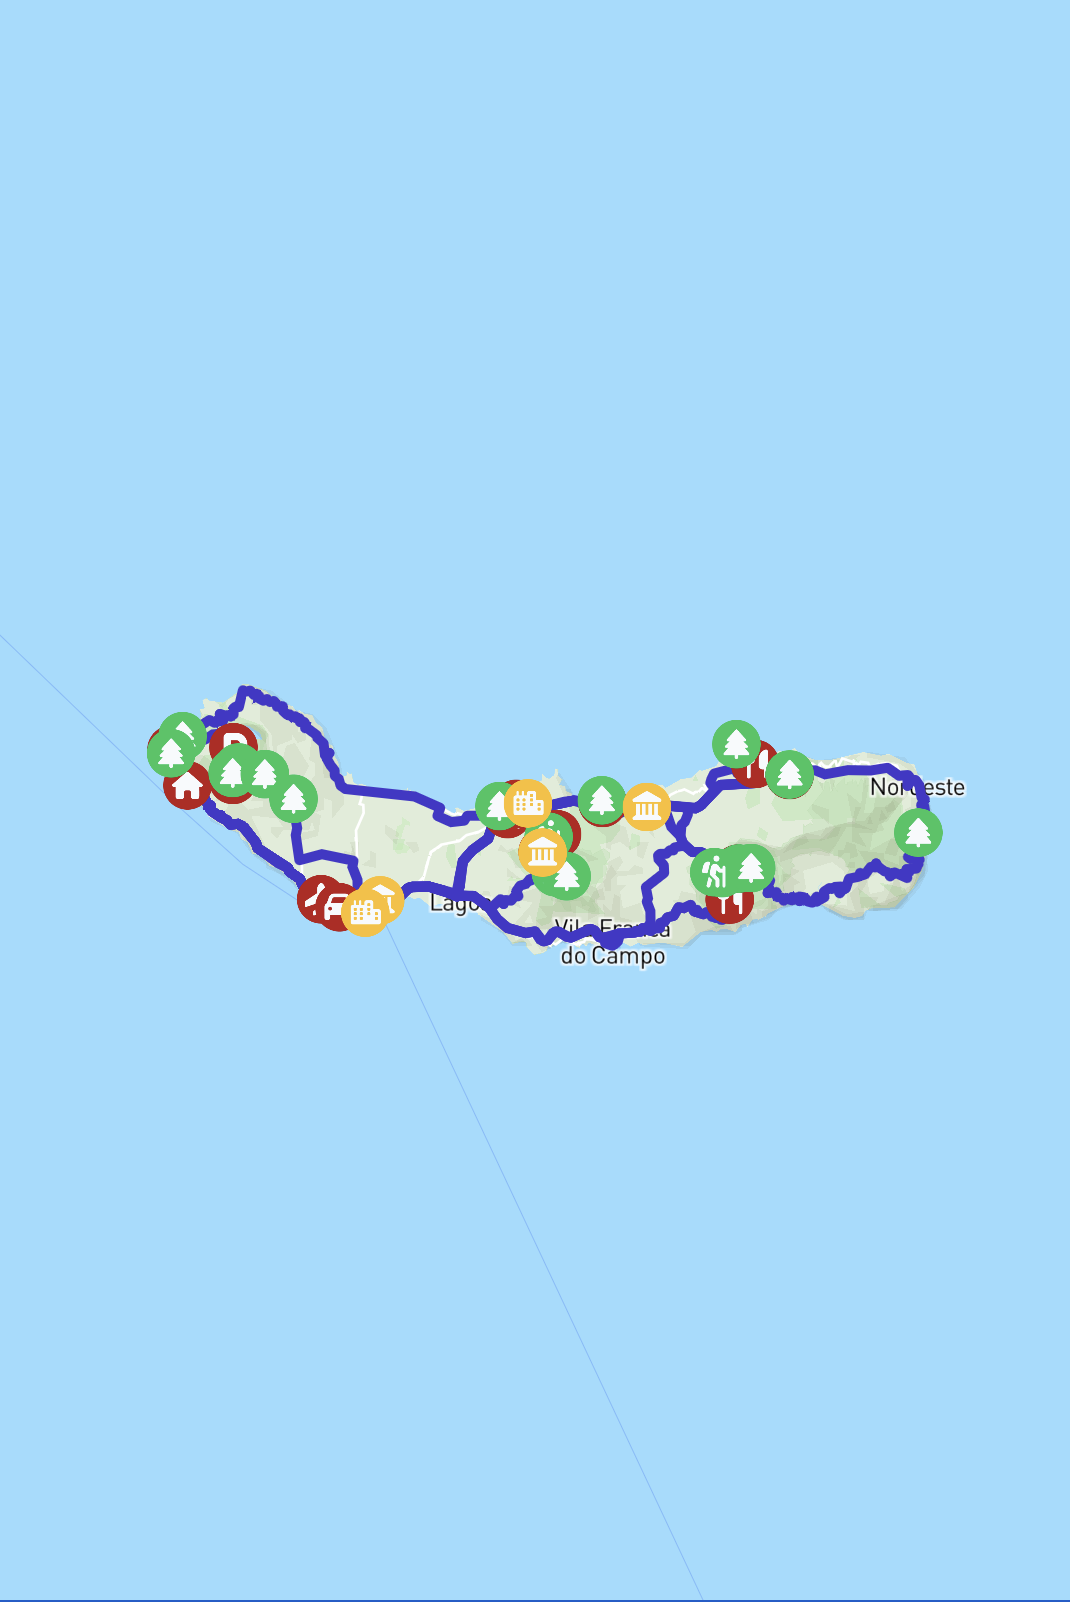 A map showing the route across São Miguel, Azores Islands.